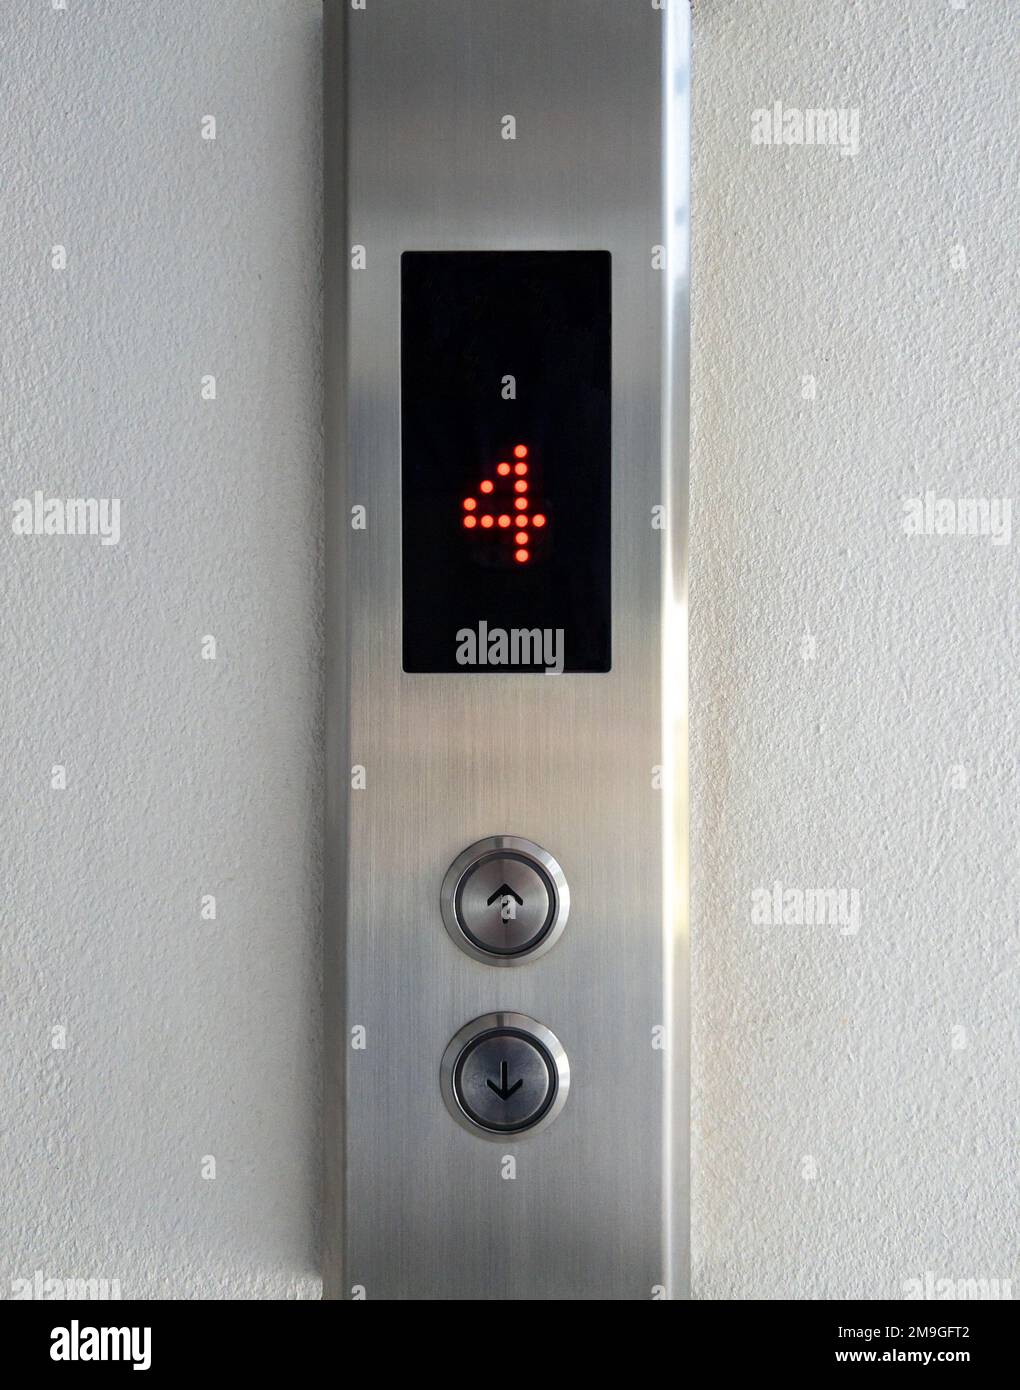 The arrow symbol with the braille on the push button of the metal panel in the passenger elevator, office building in the urban area, front view with Stock Photo